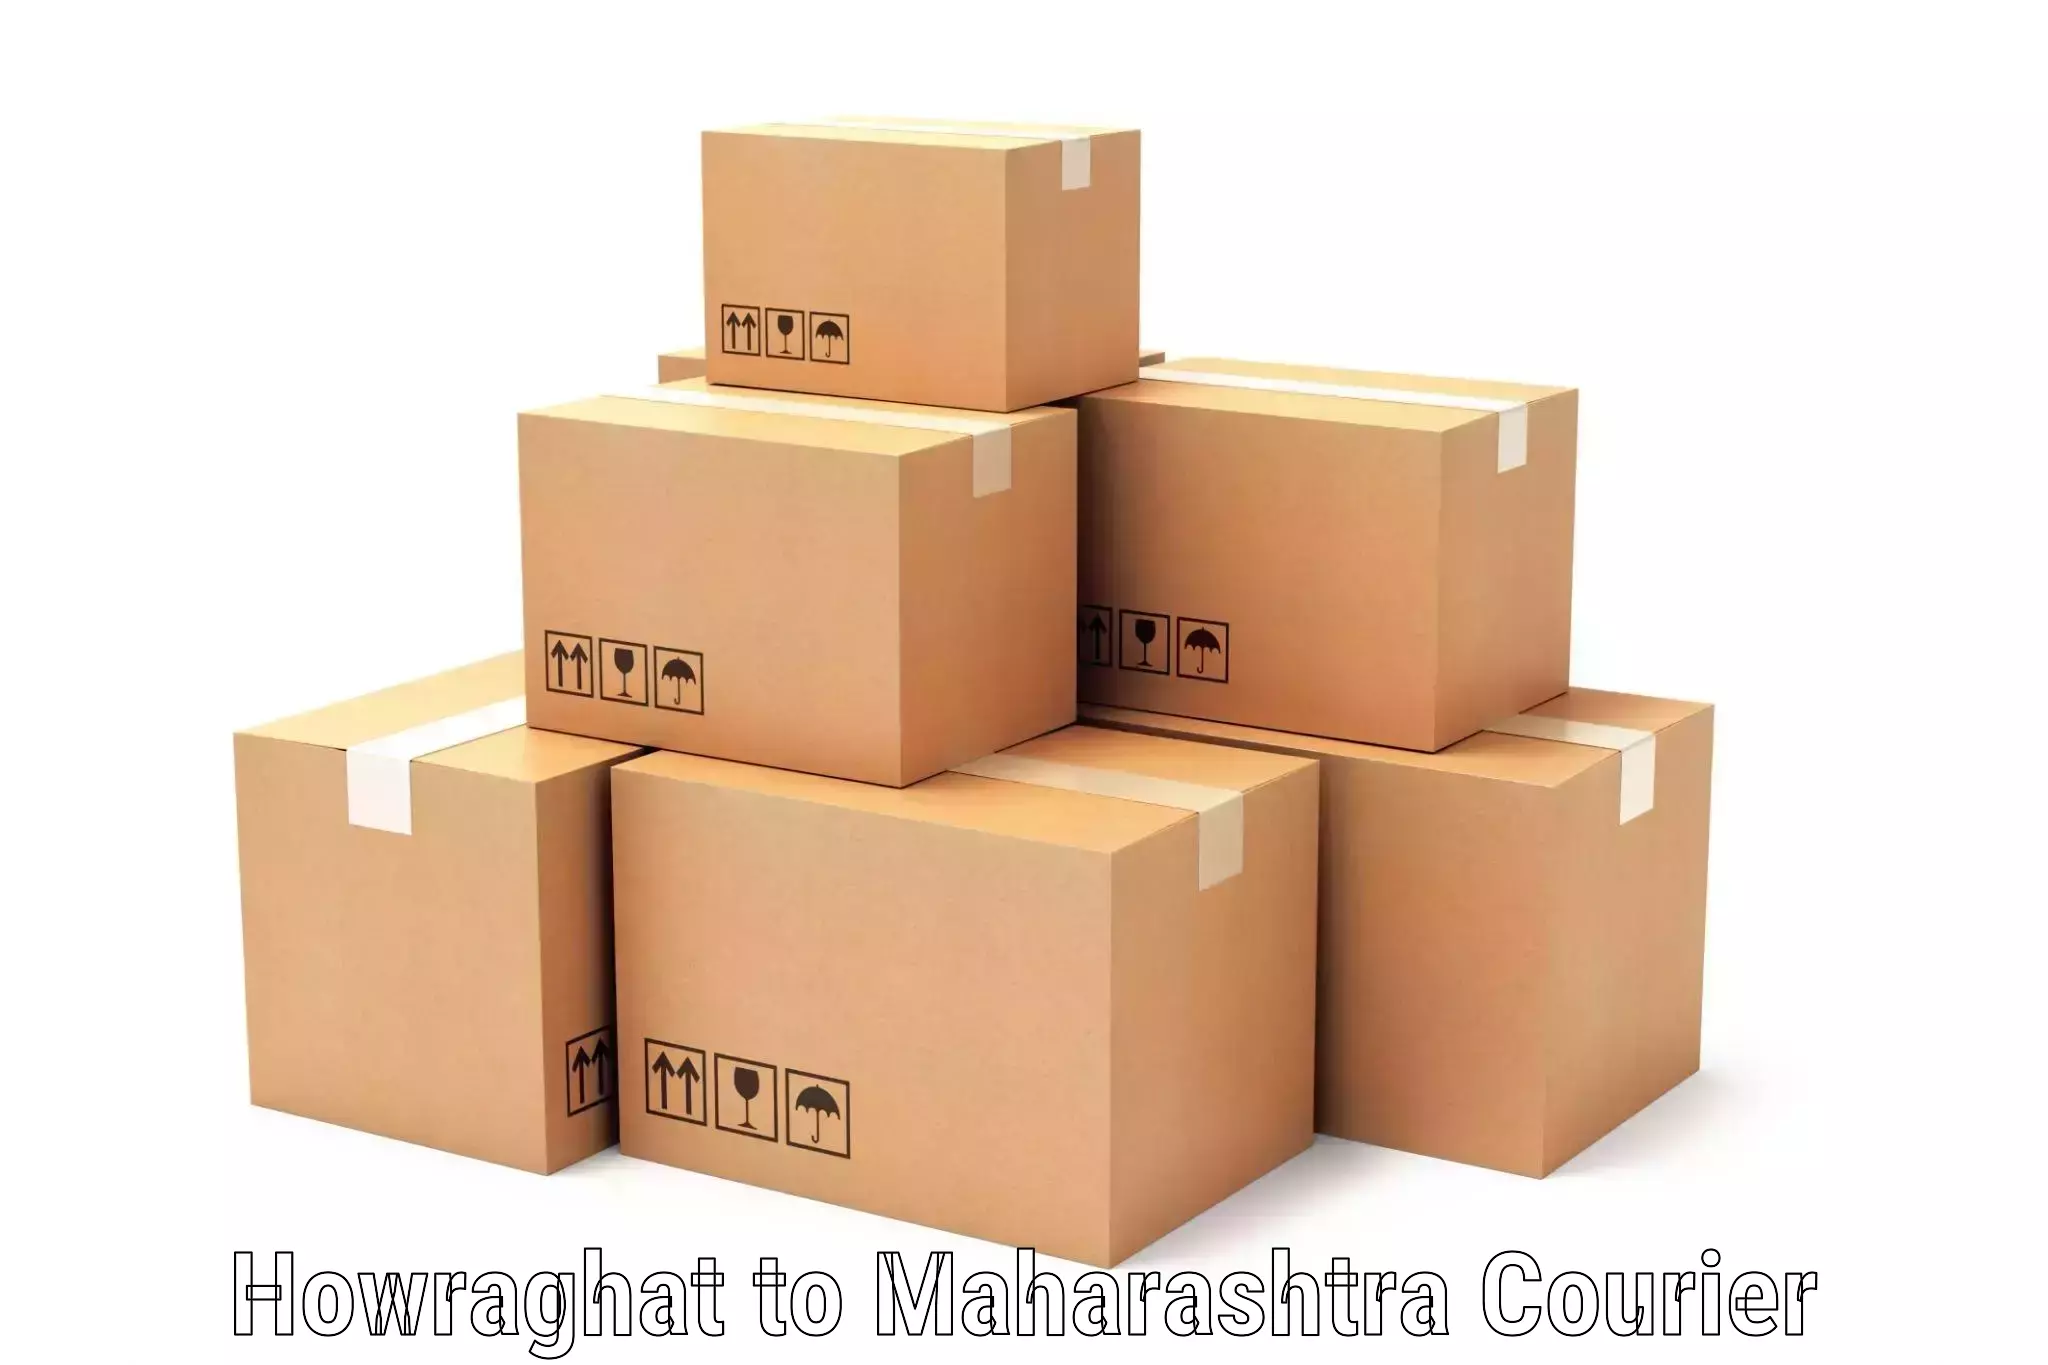 Courier service booking Howraghat to Paratwada